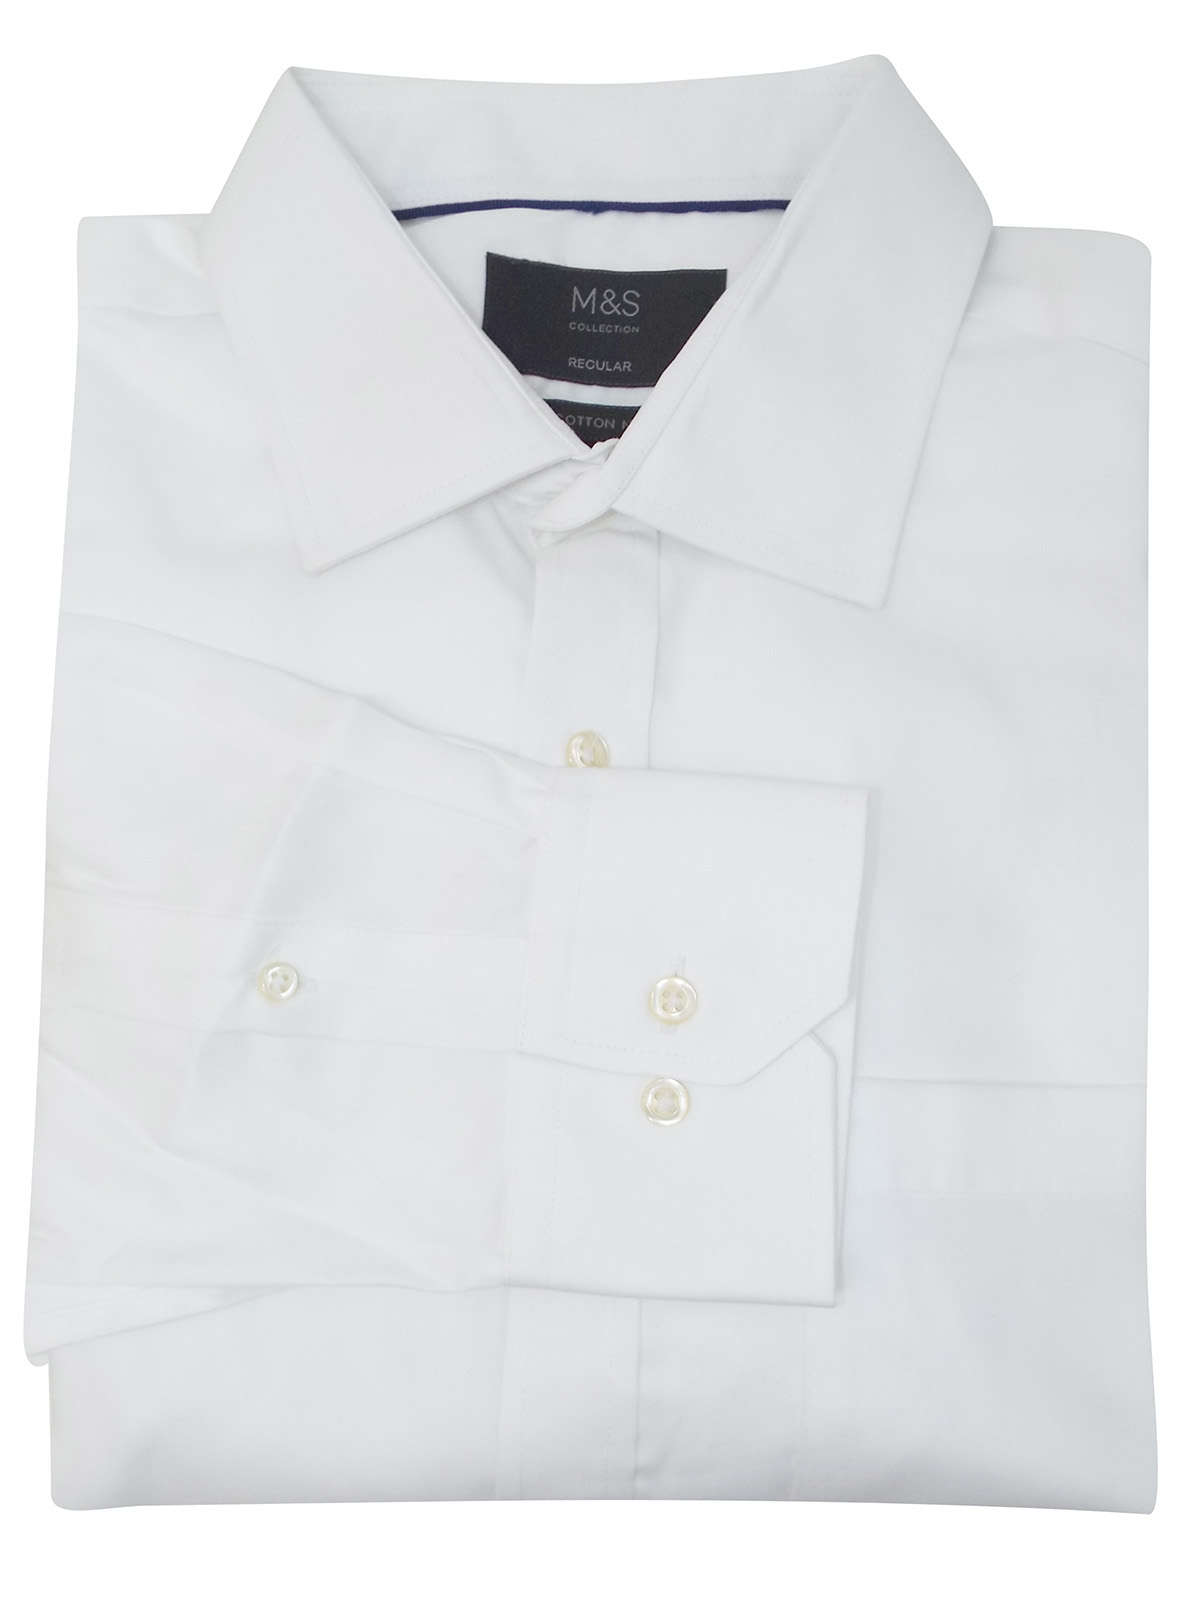 Marks and Spencer - - M&5 WHITE Pure Cotton Non-Iron Regular Fit Shirt ...